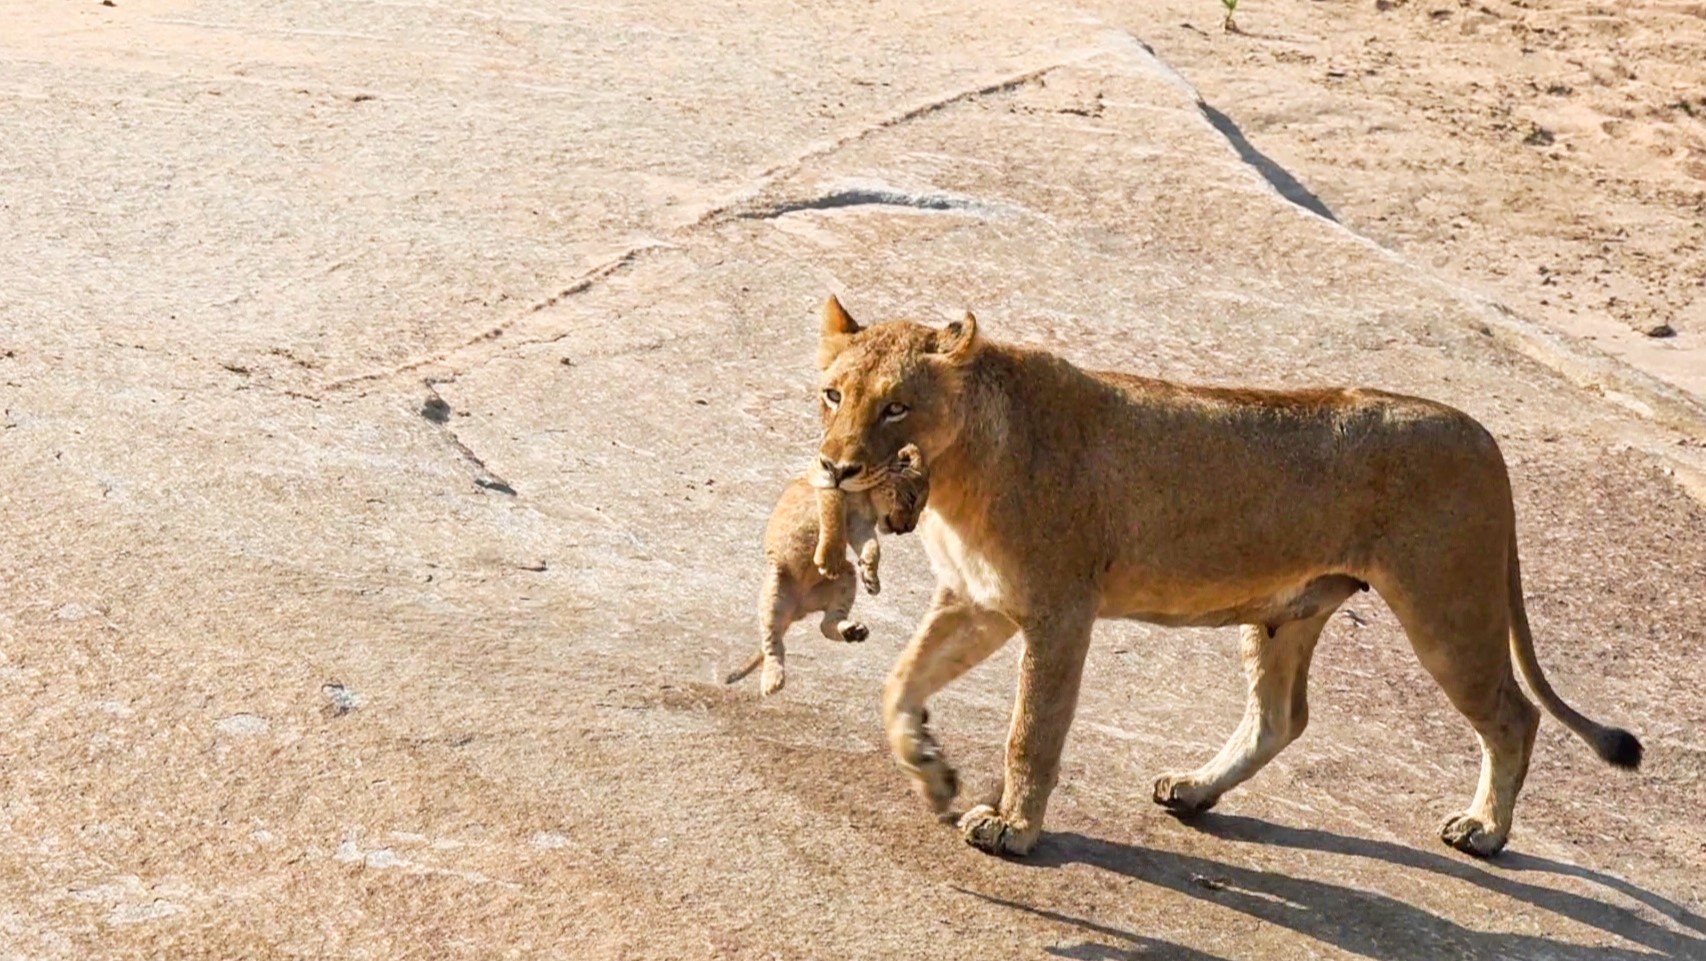 Lions live in structured social groups called prides, consisting of related females, their offspring, and a few adult males. This social living arrangement allows them to share responsibilities such as hunting, raising cubs, and defending their territory. The bonds formed within a pride are crucial for their survival, as lions rely on cooperation and mutual support.